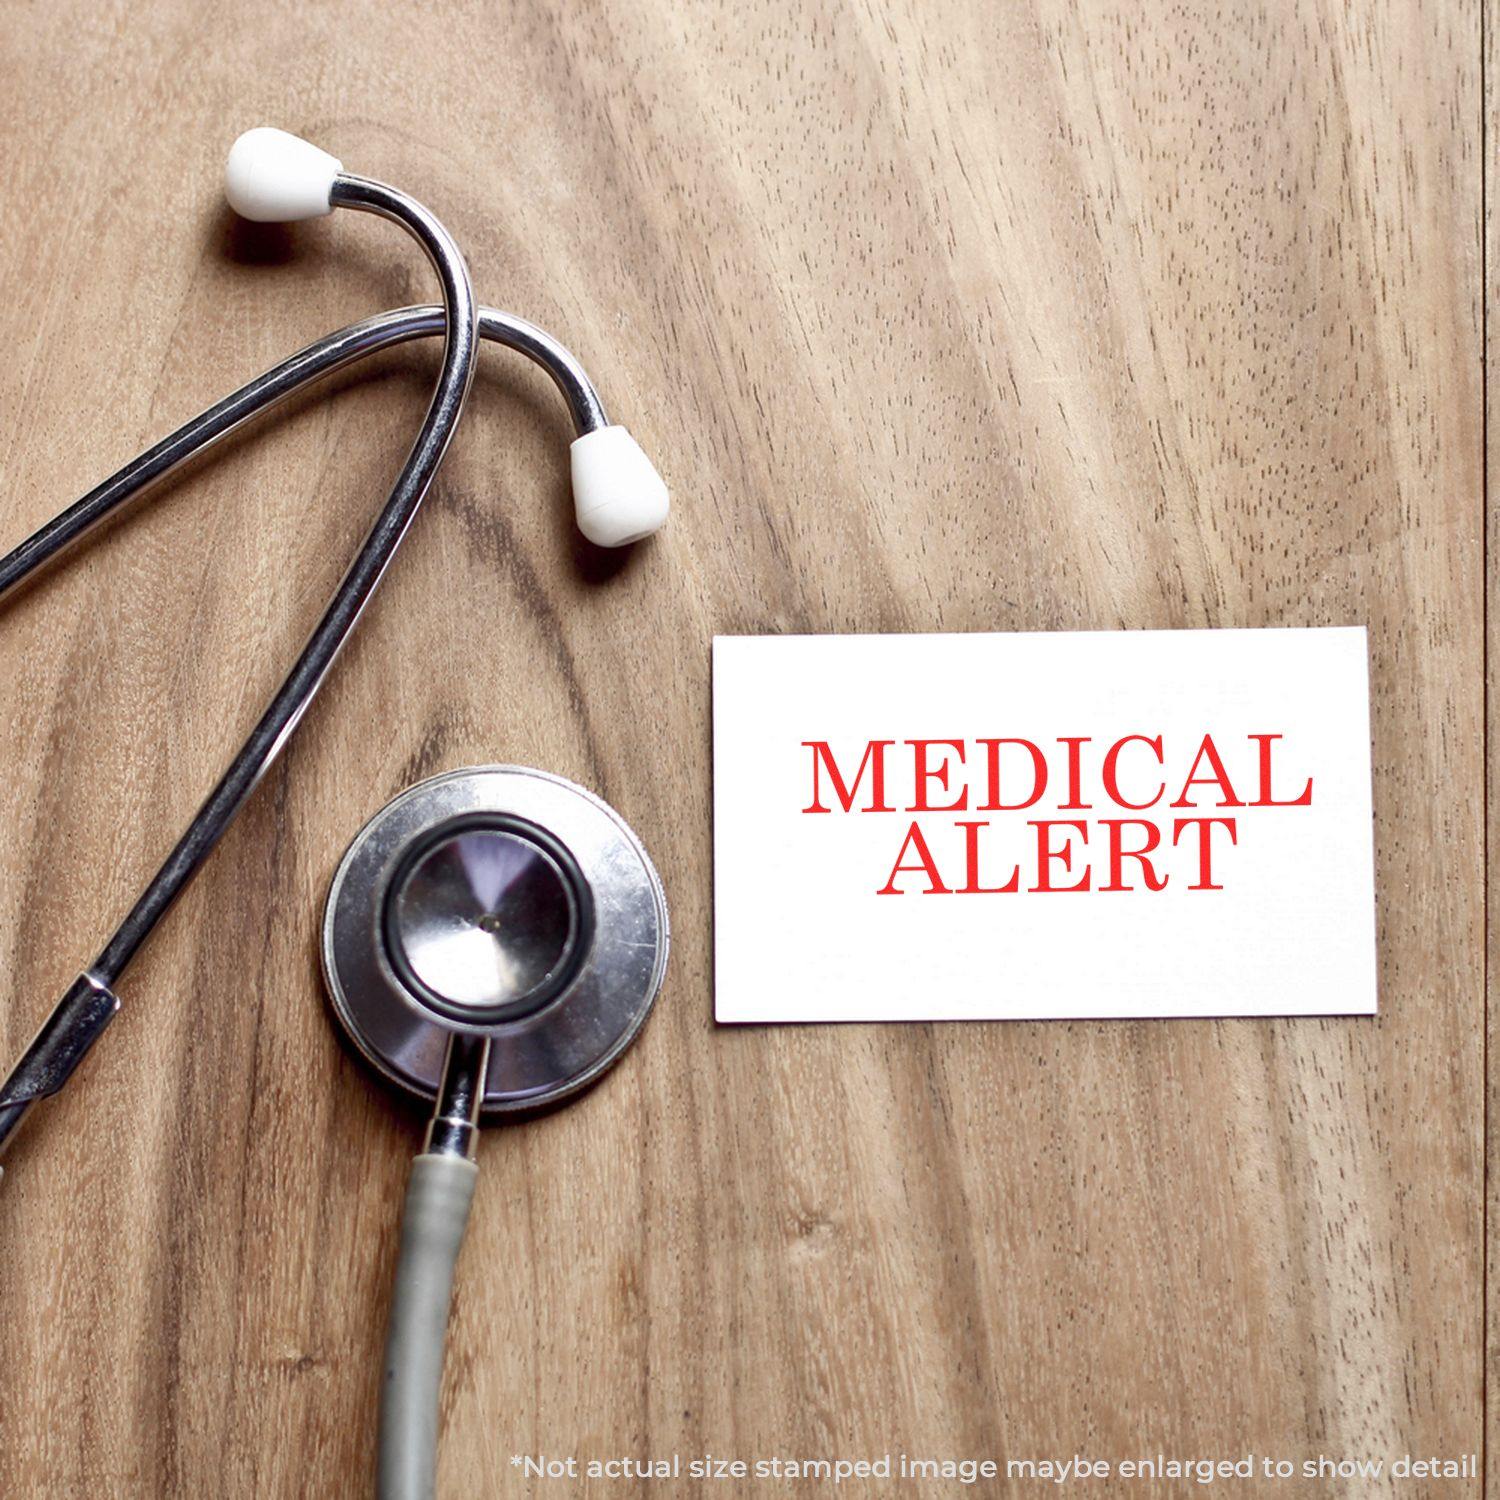 A stock office rubber stamp with a stamped image showing how the text "MEDICAL ALERT" in a large font is displayed after stamping.